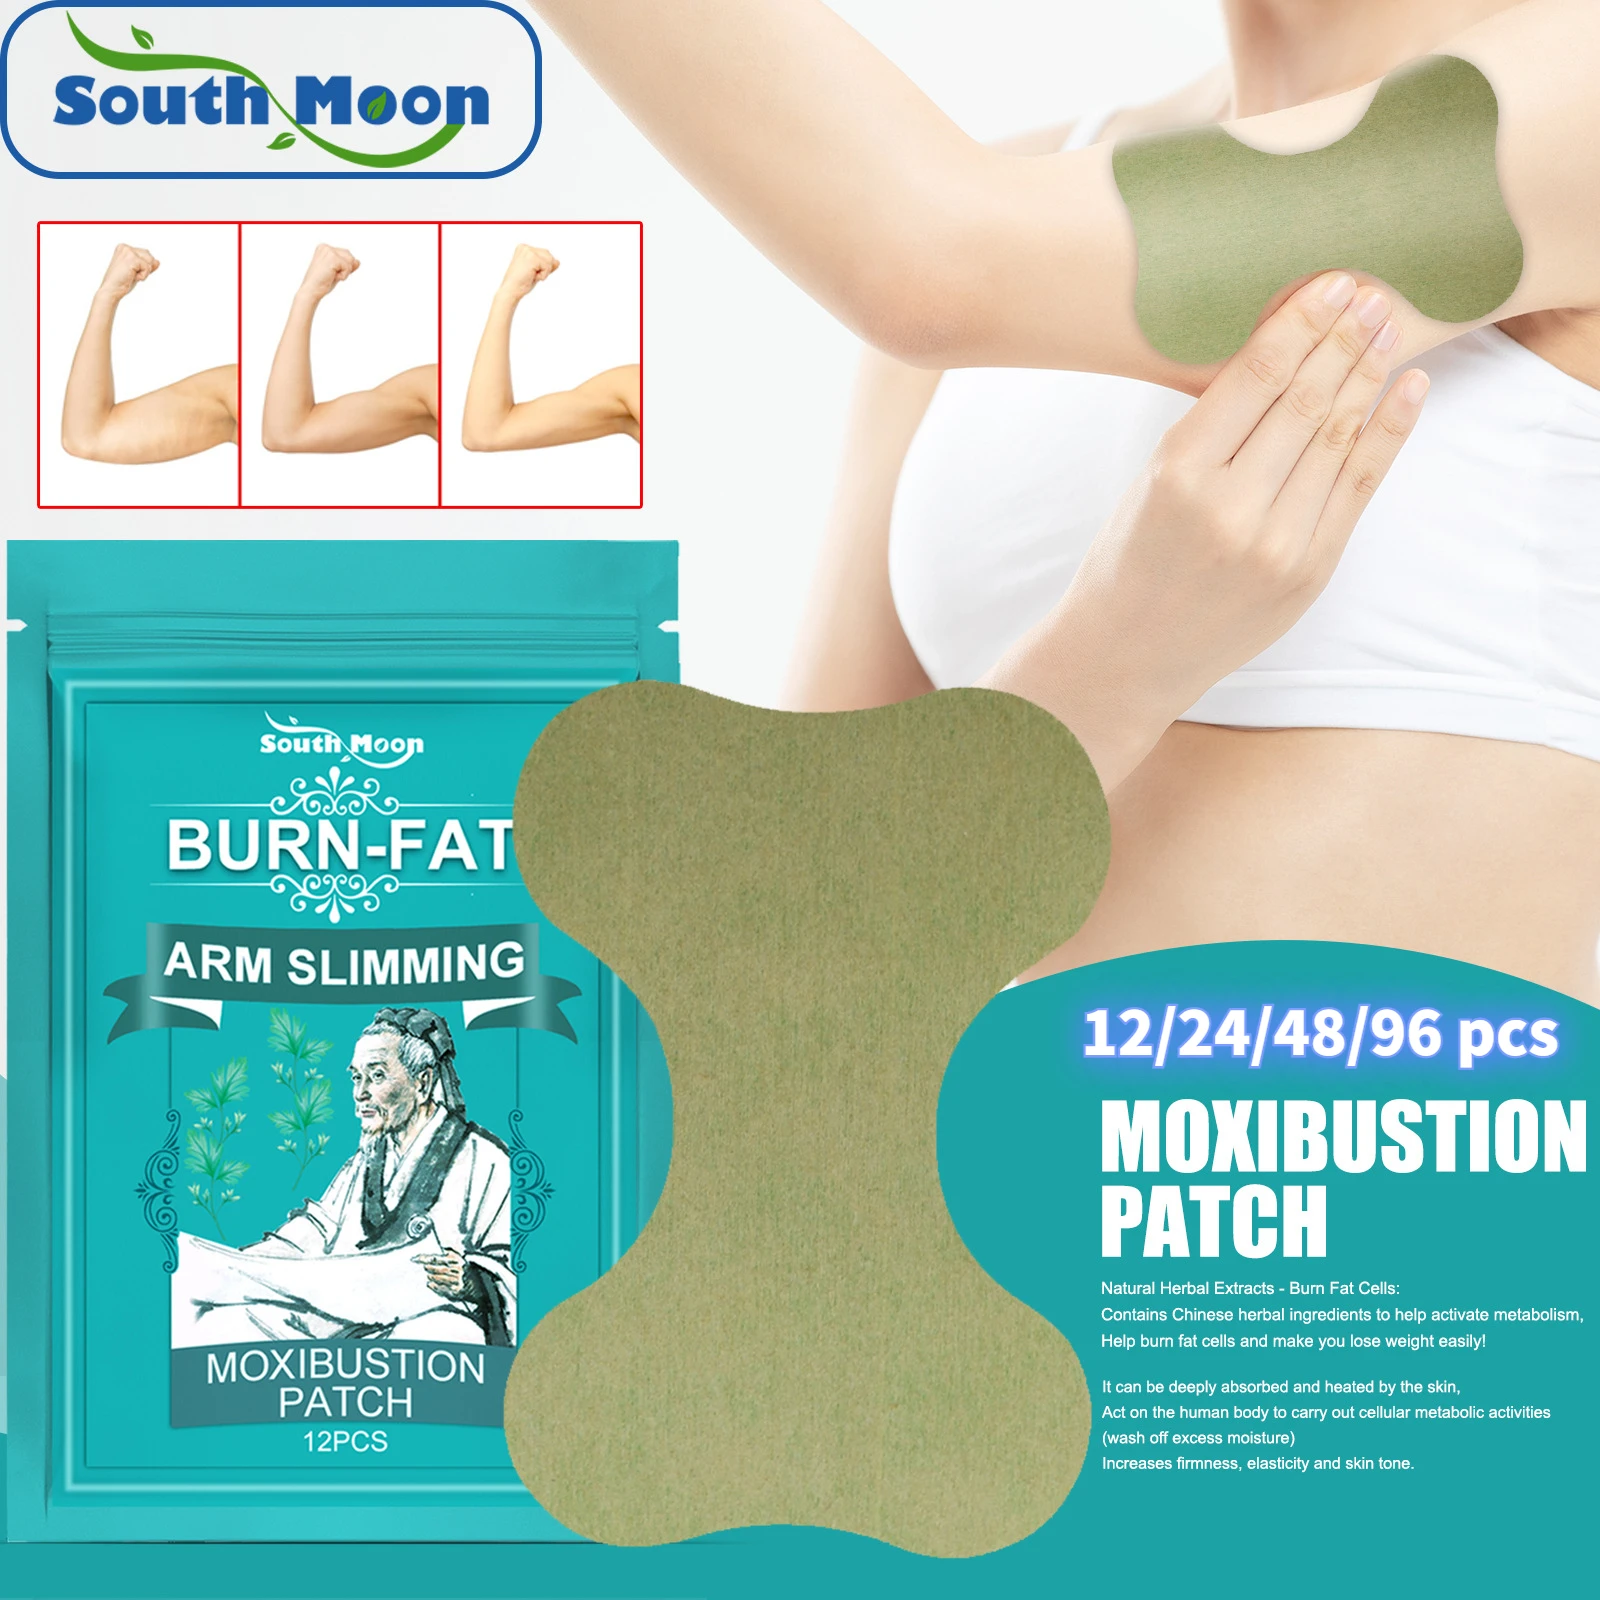 

South Moon Thin Arm Patch Lose Weight Moxibustion Paste Herbal Slimming Fat Burning Hot Compress Warm Arm Body Slim Patches